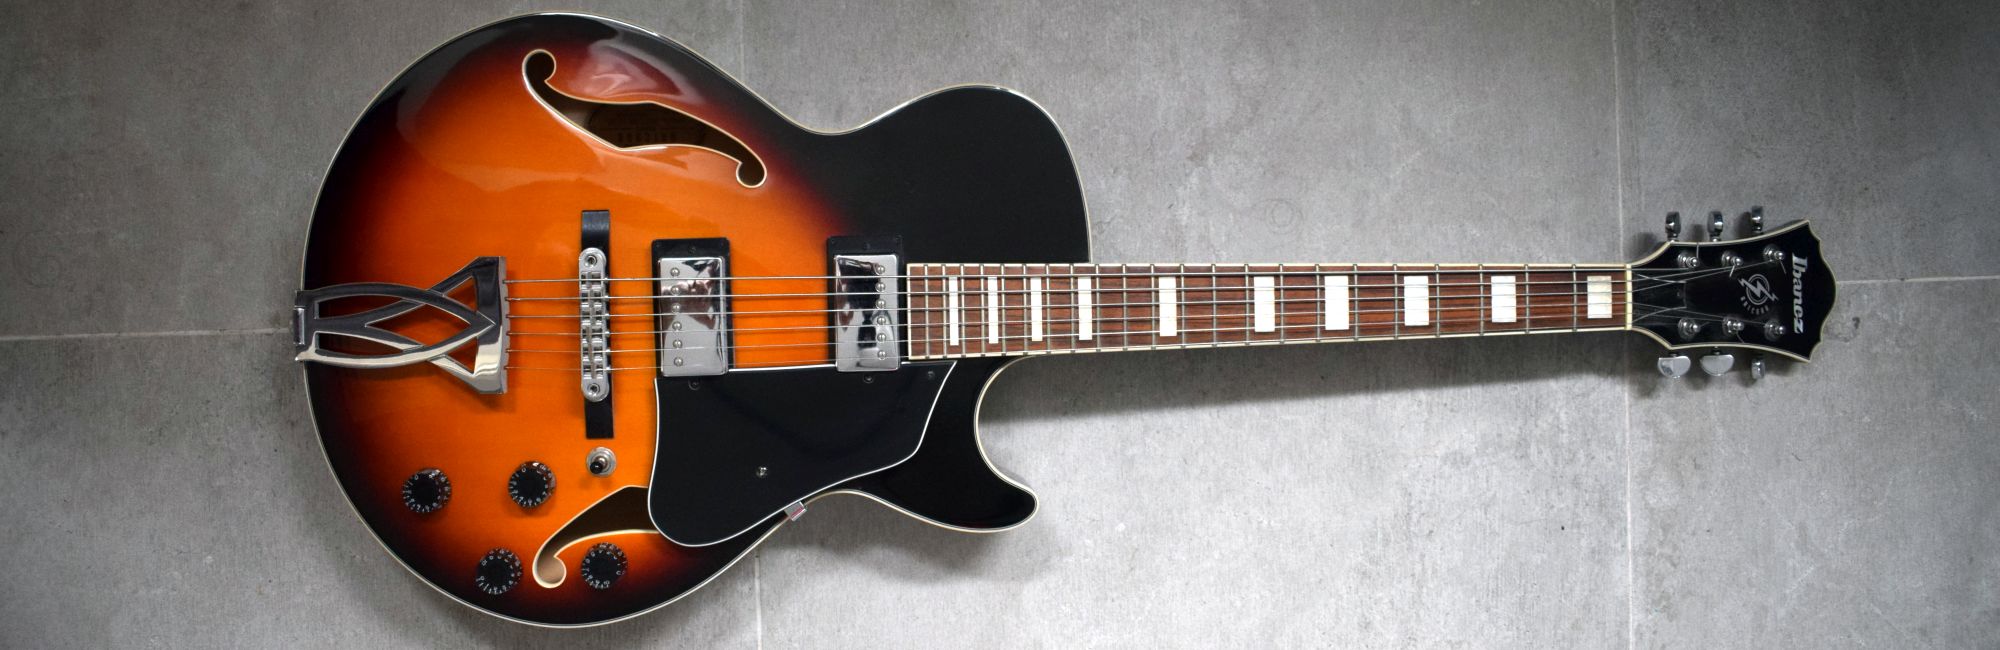 Ibanez AG75 BS Hollow-body